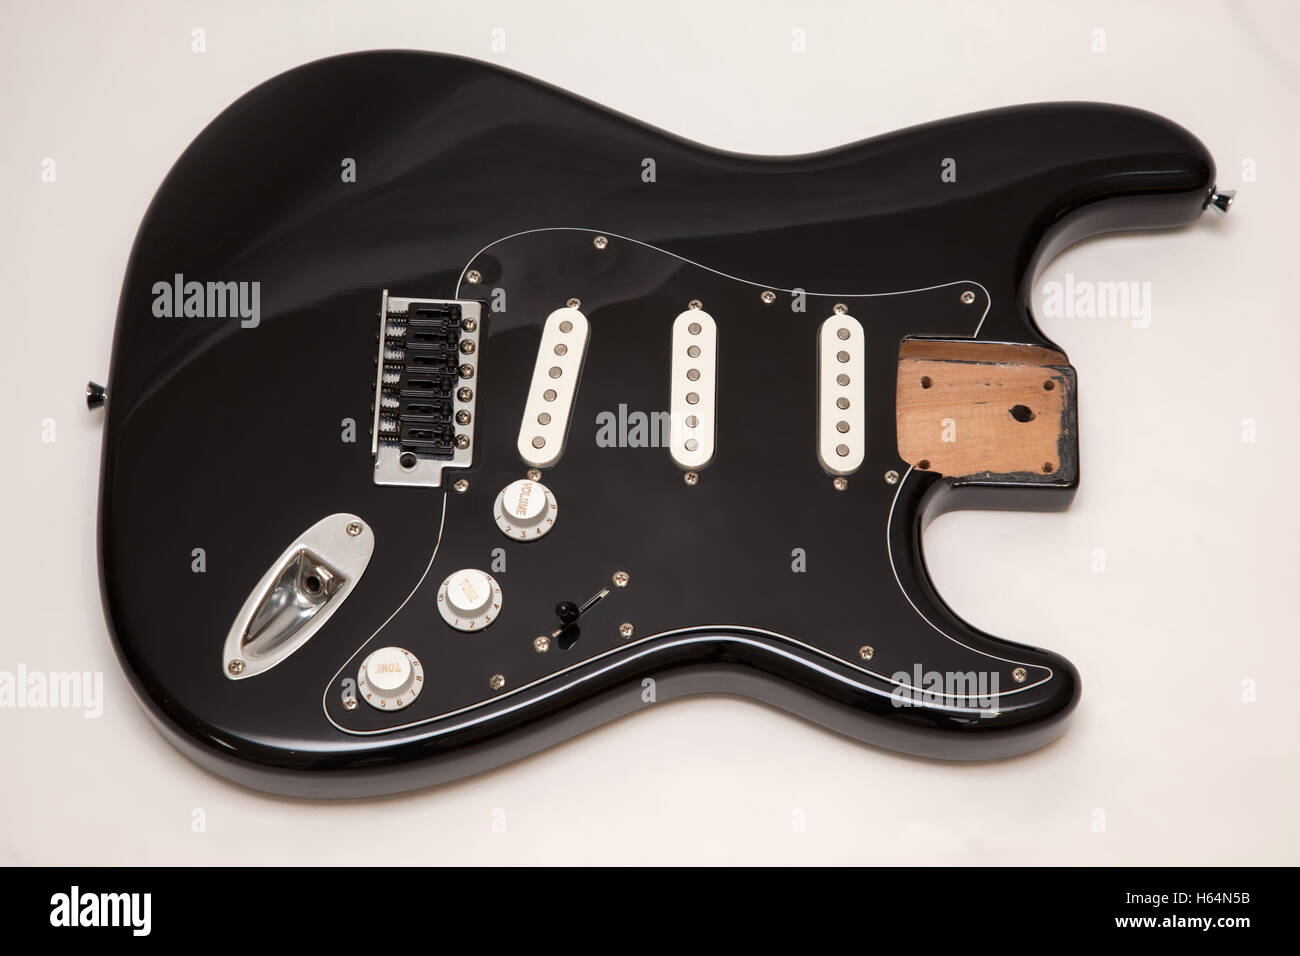 A black fender stratocaster copy electric guitar body, neck removed, tremolo arm removed Stock Photo